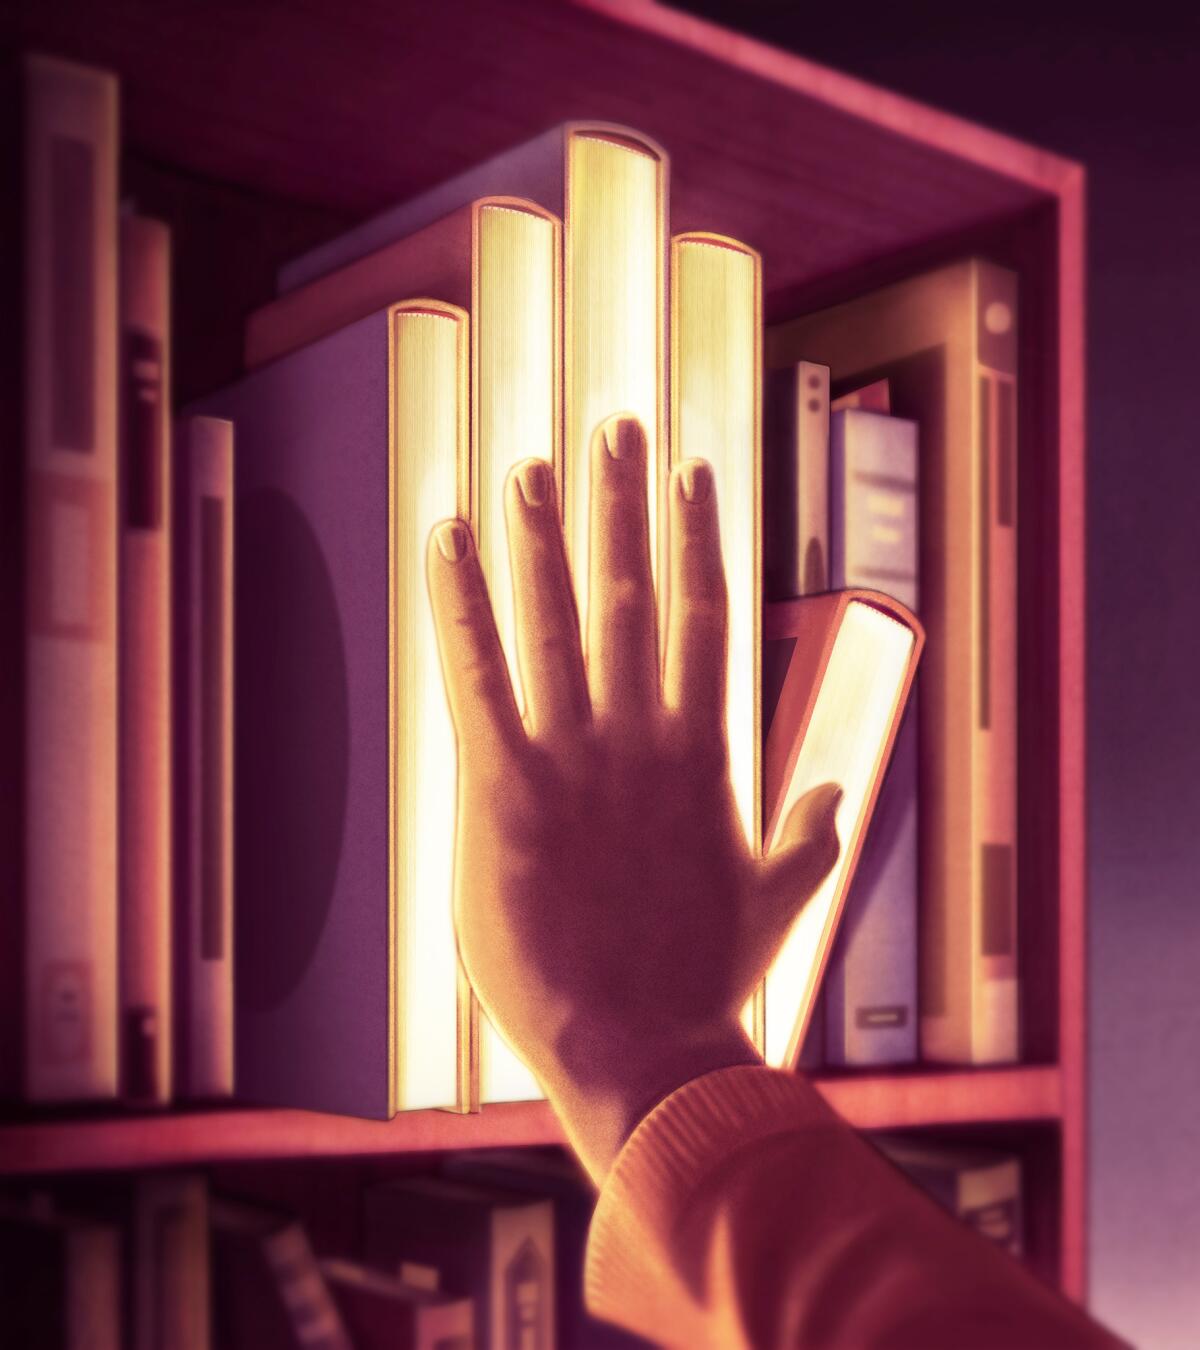 Touch a book, fall in love.